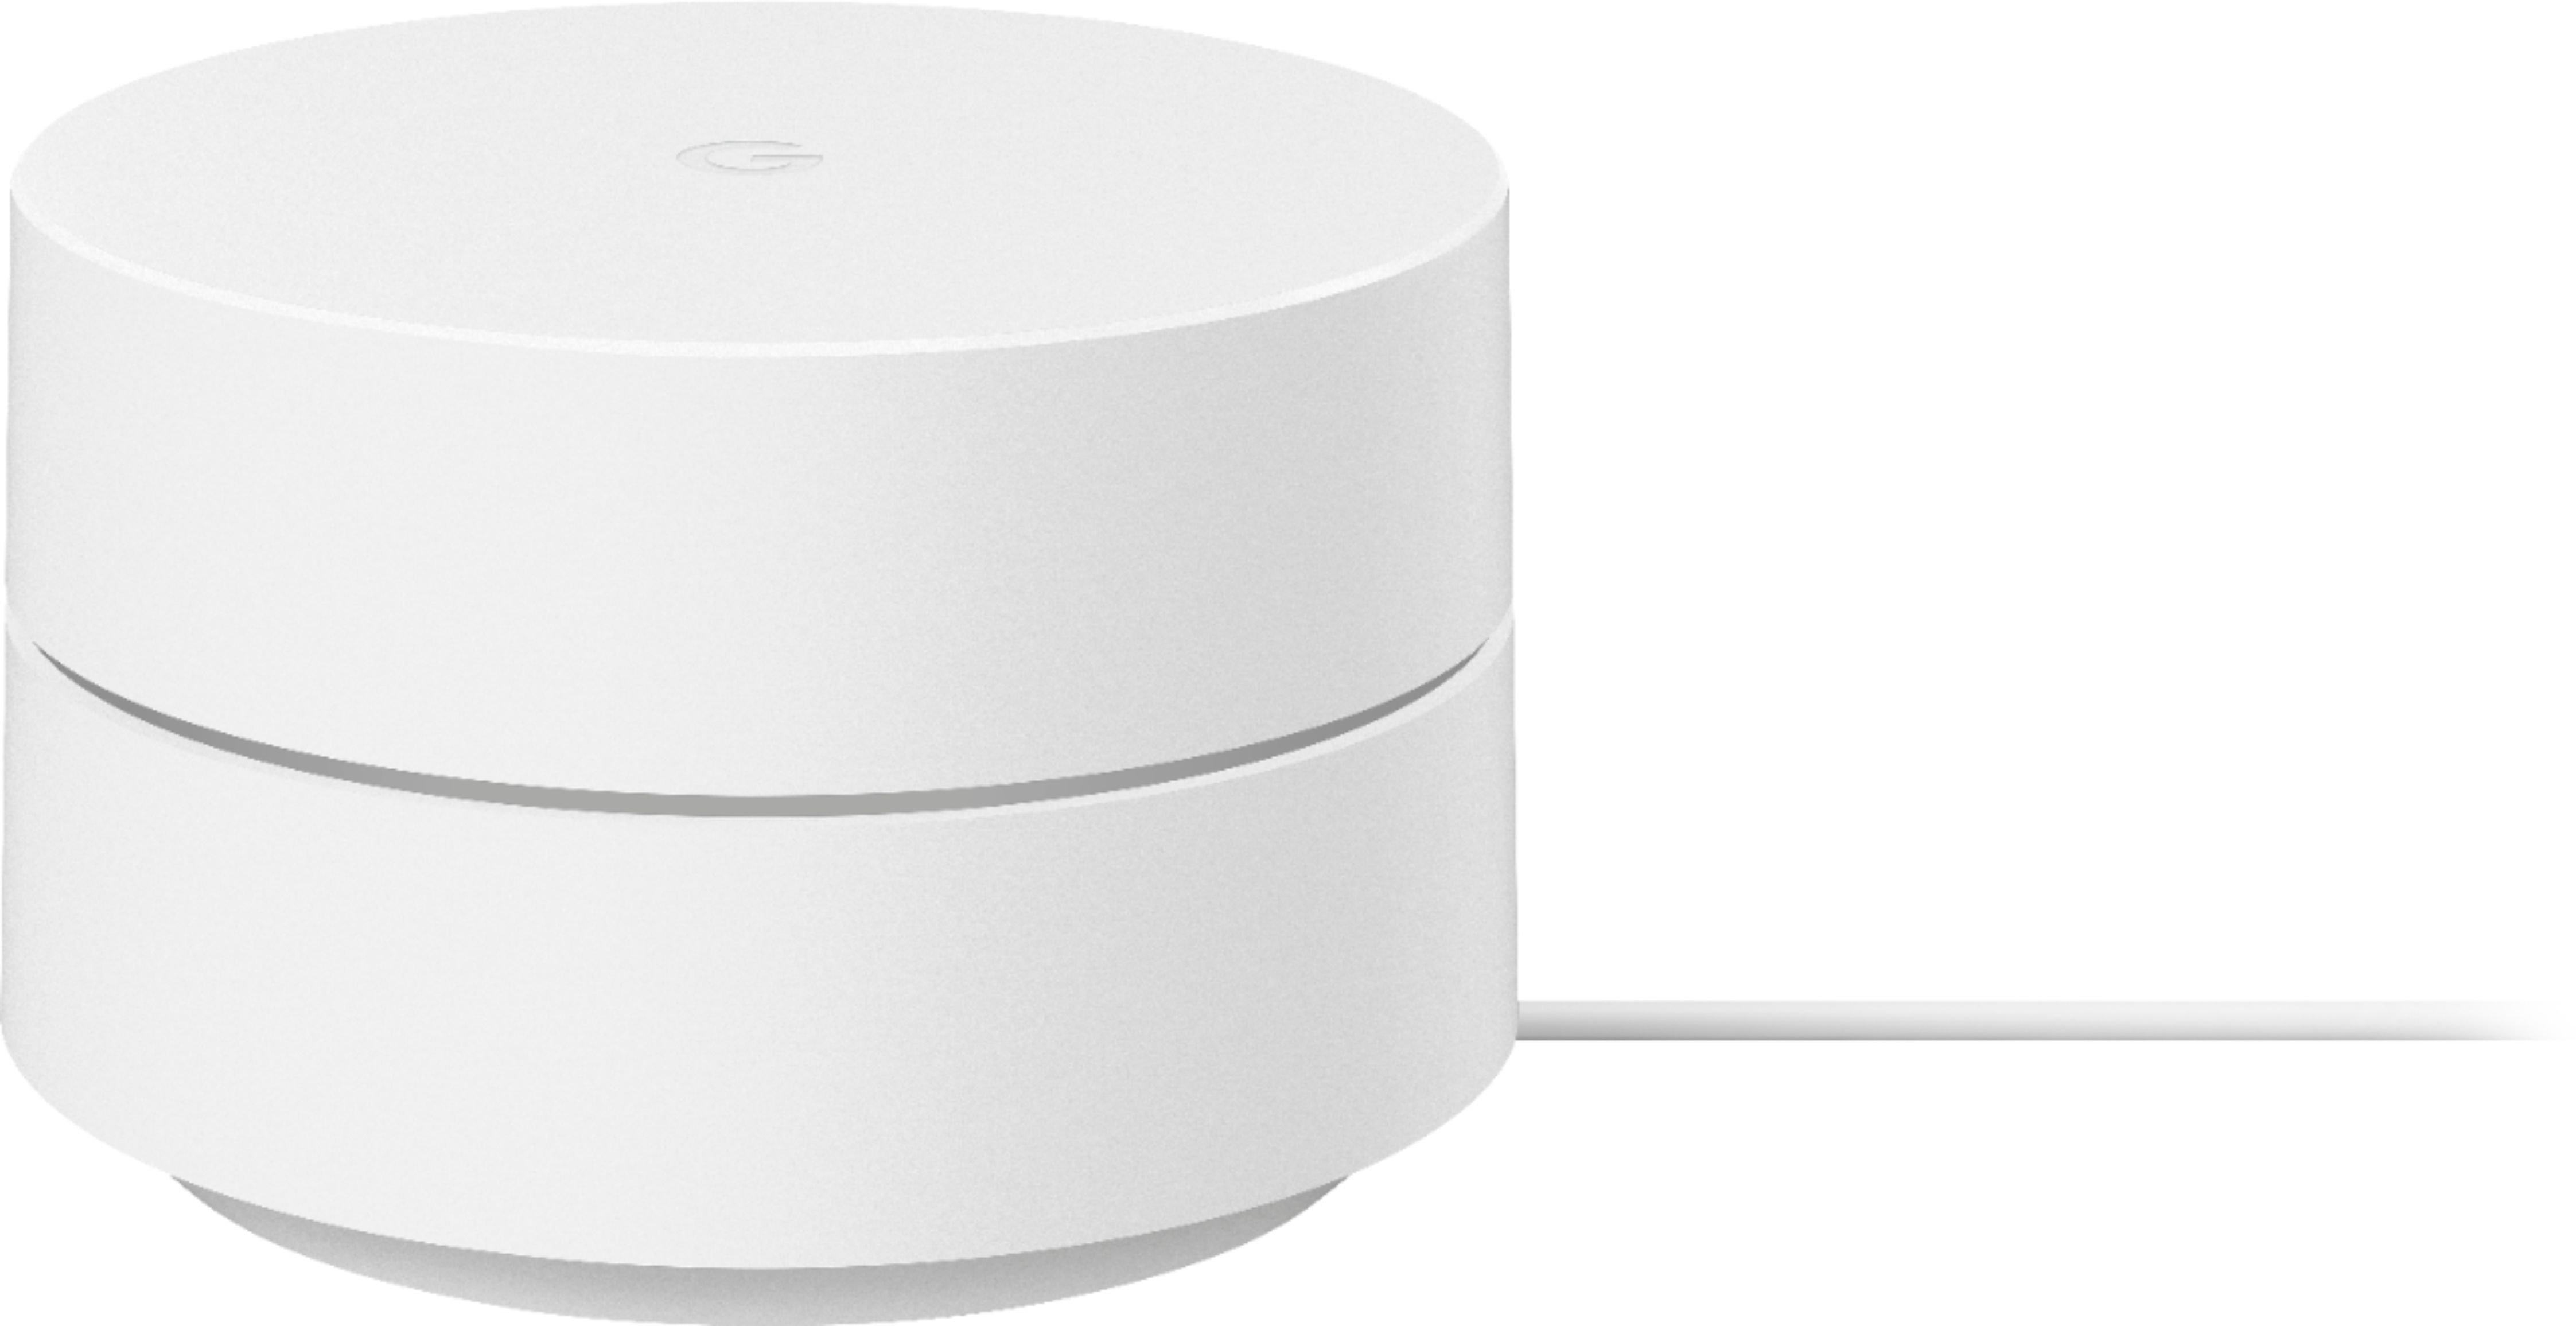 list item 2 of 7 Google Nest AC1200 Whole Home WiFi System 1 Pack